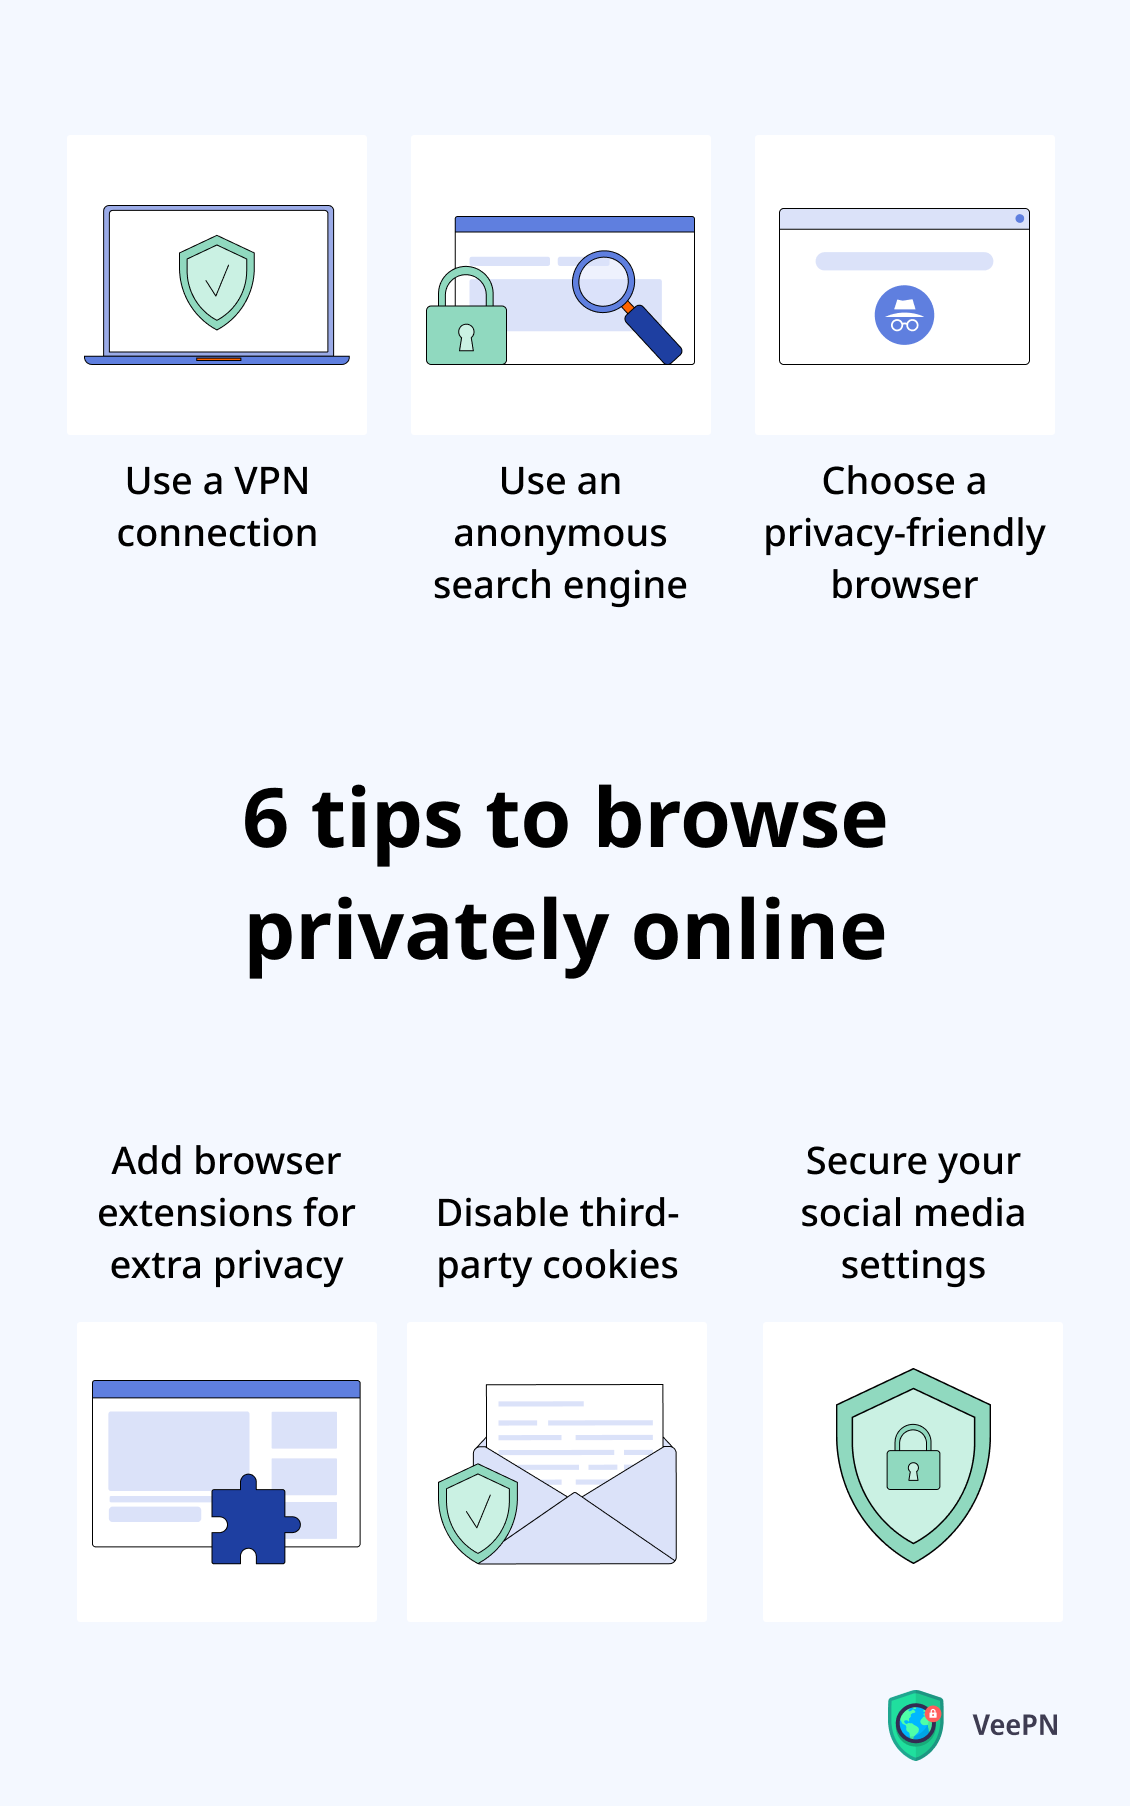 How to browse privately online